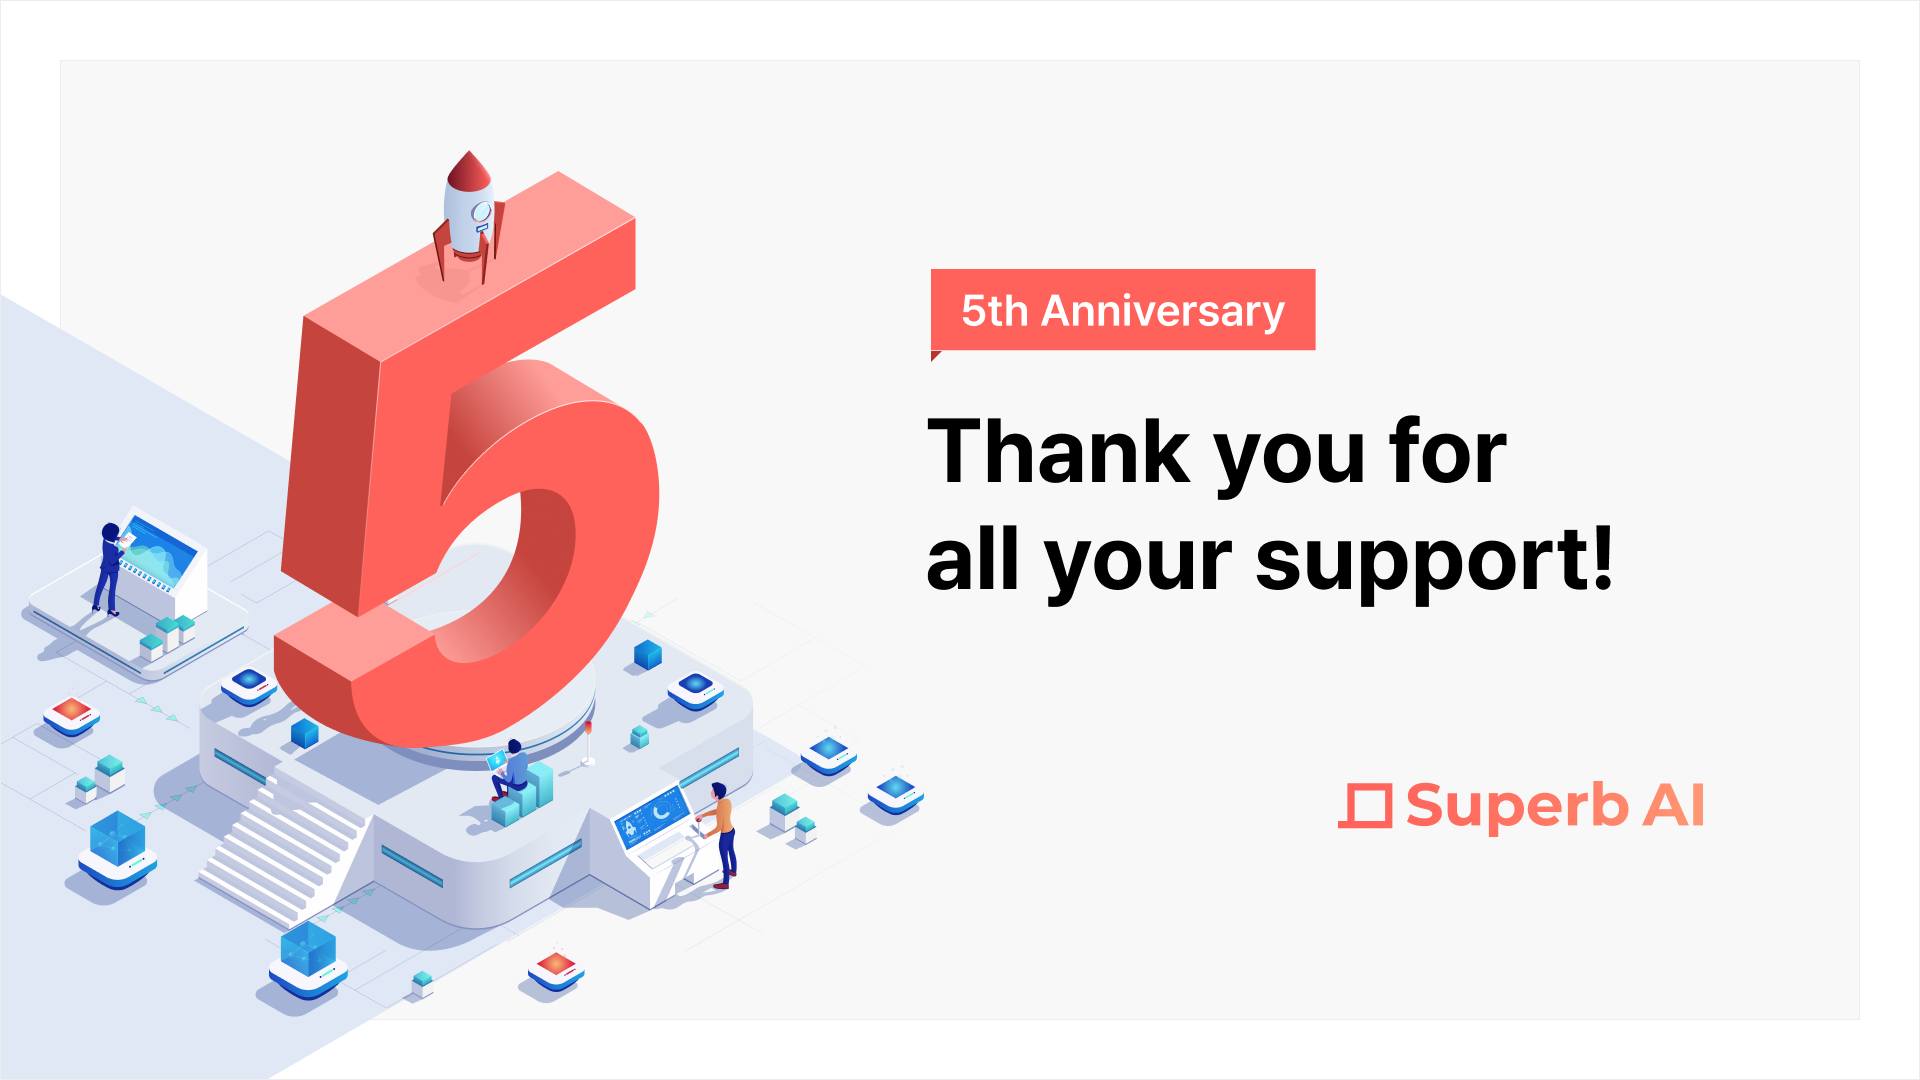 Superb AI celebrates five years of providing computer vision tools to businesses around the world.